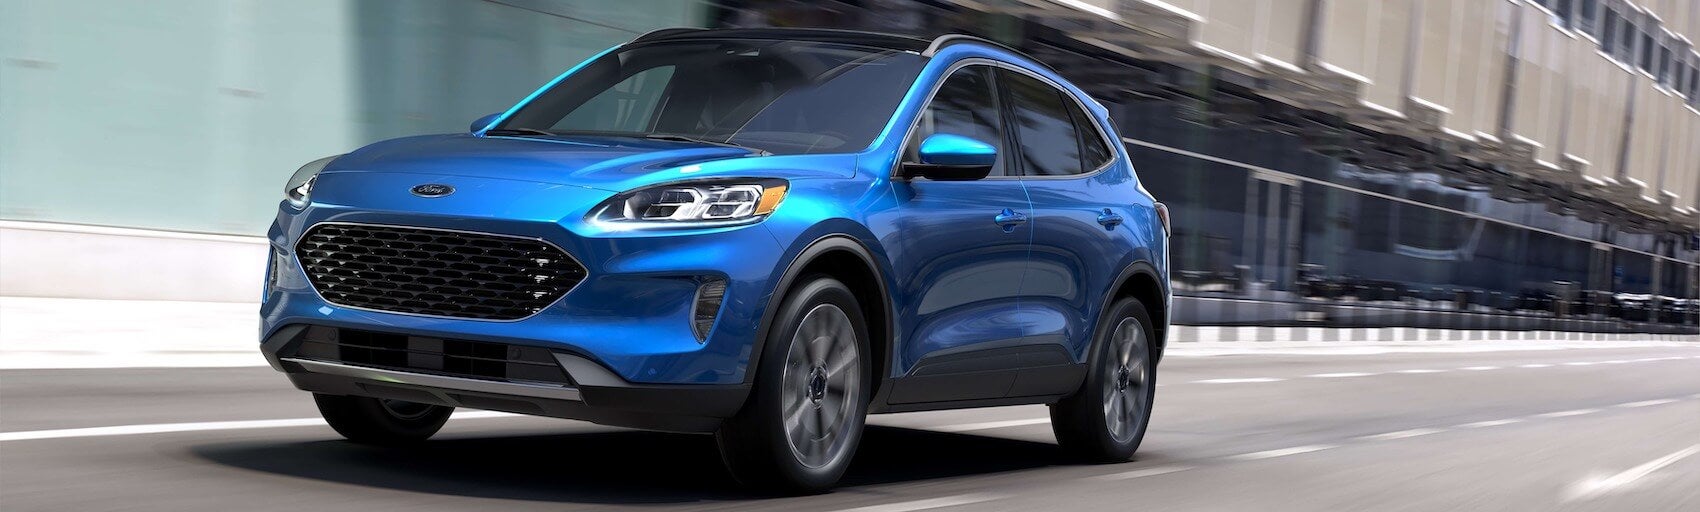 2021 Ford Escape Hybrid Moving